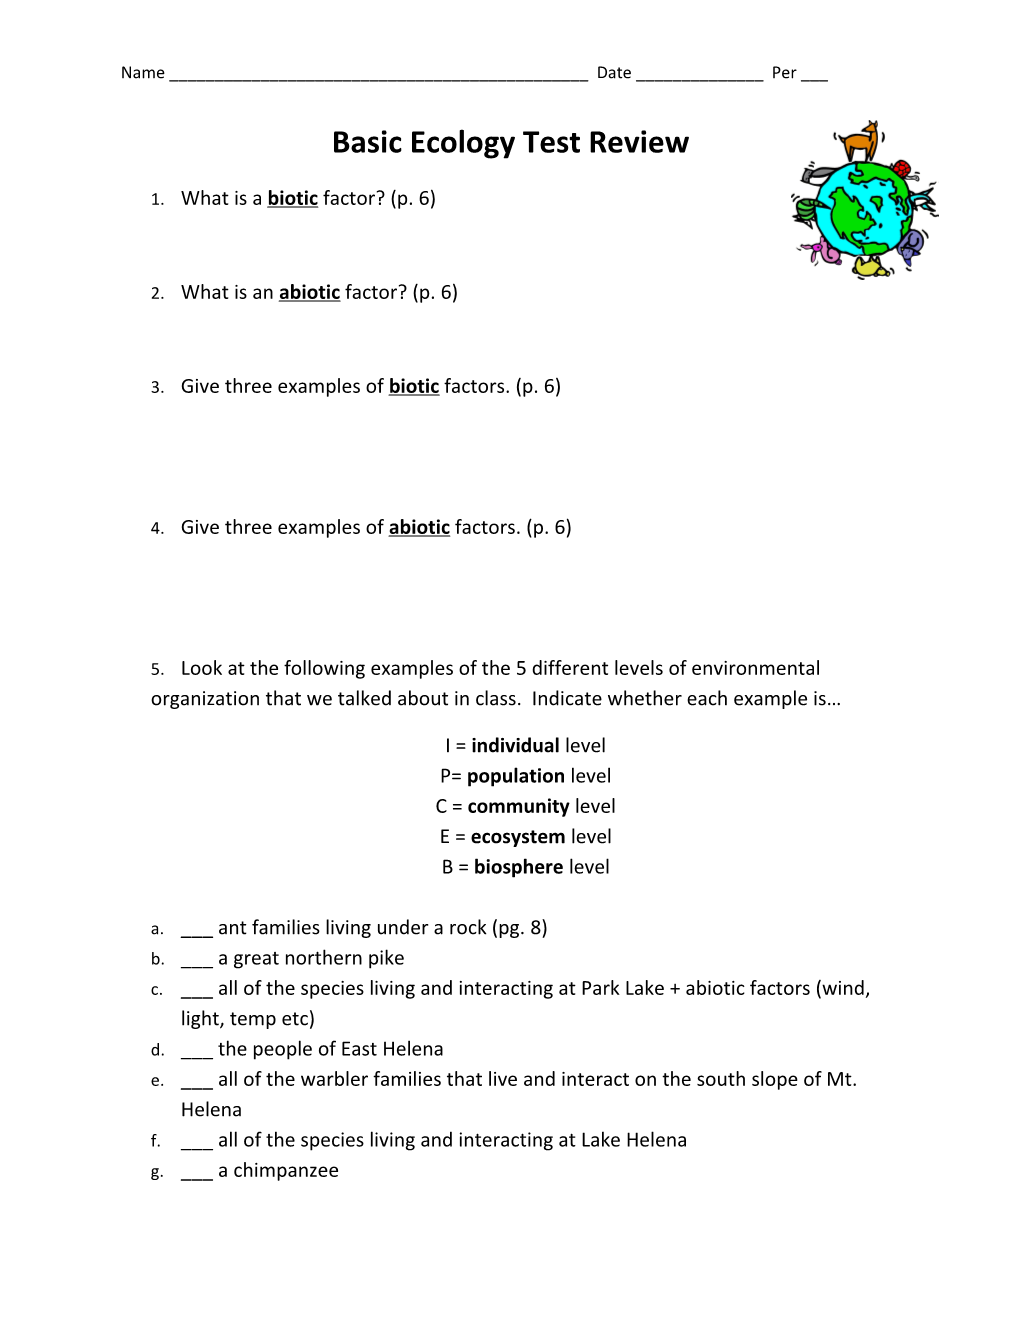 Basic Ecology Test Review